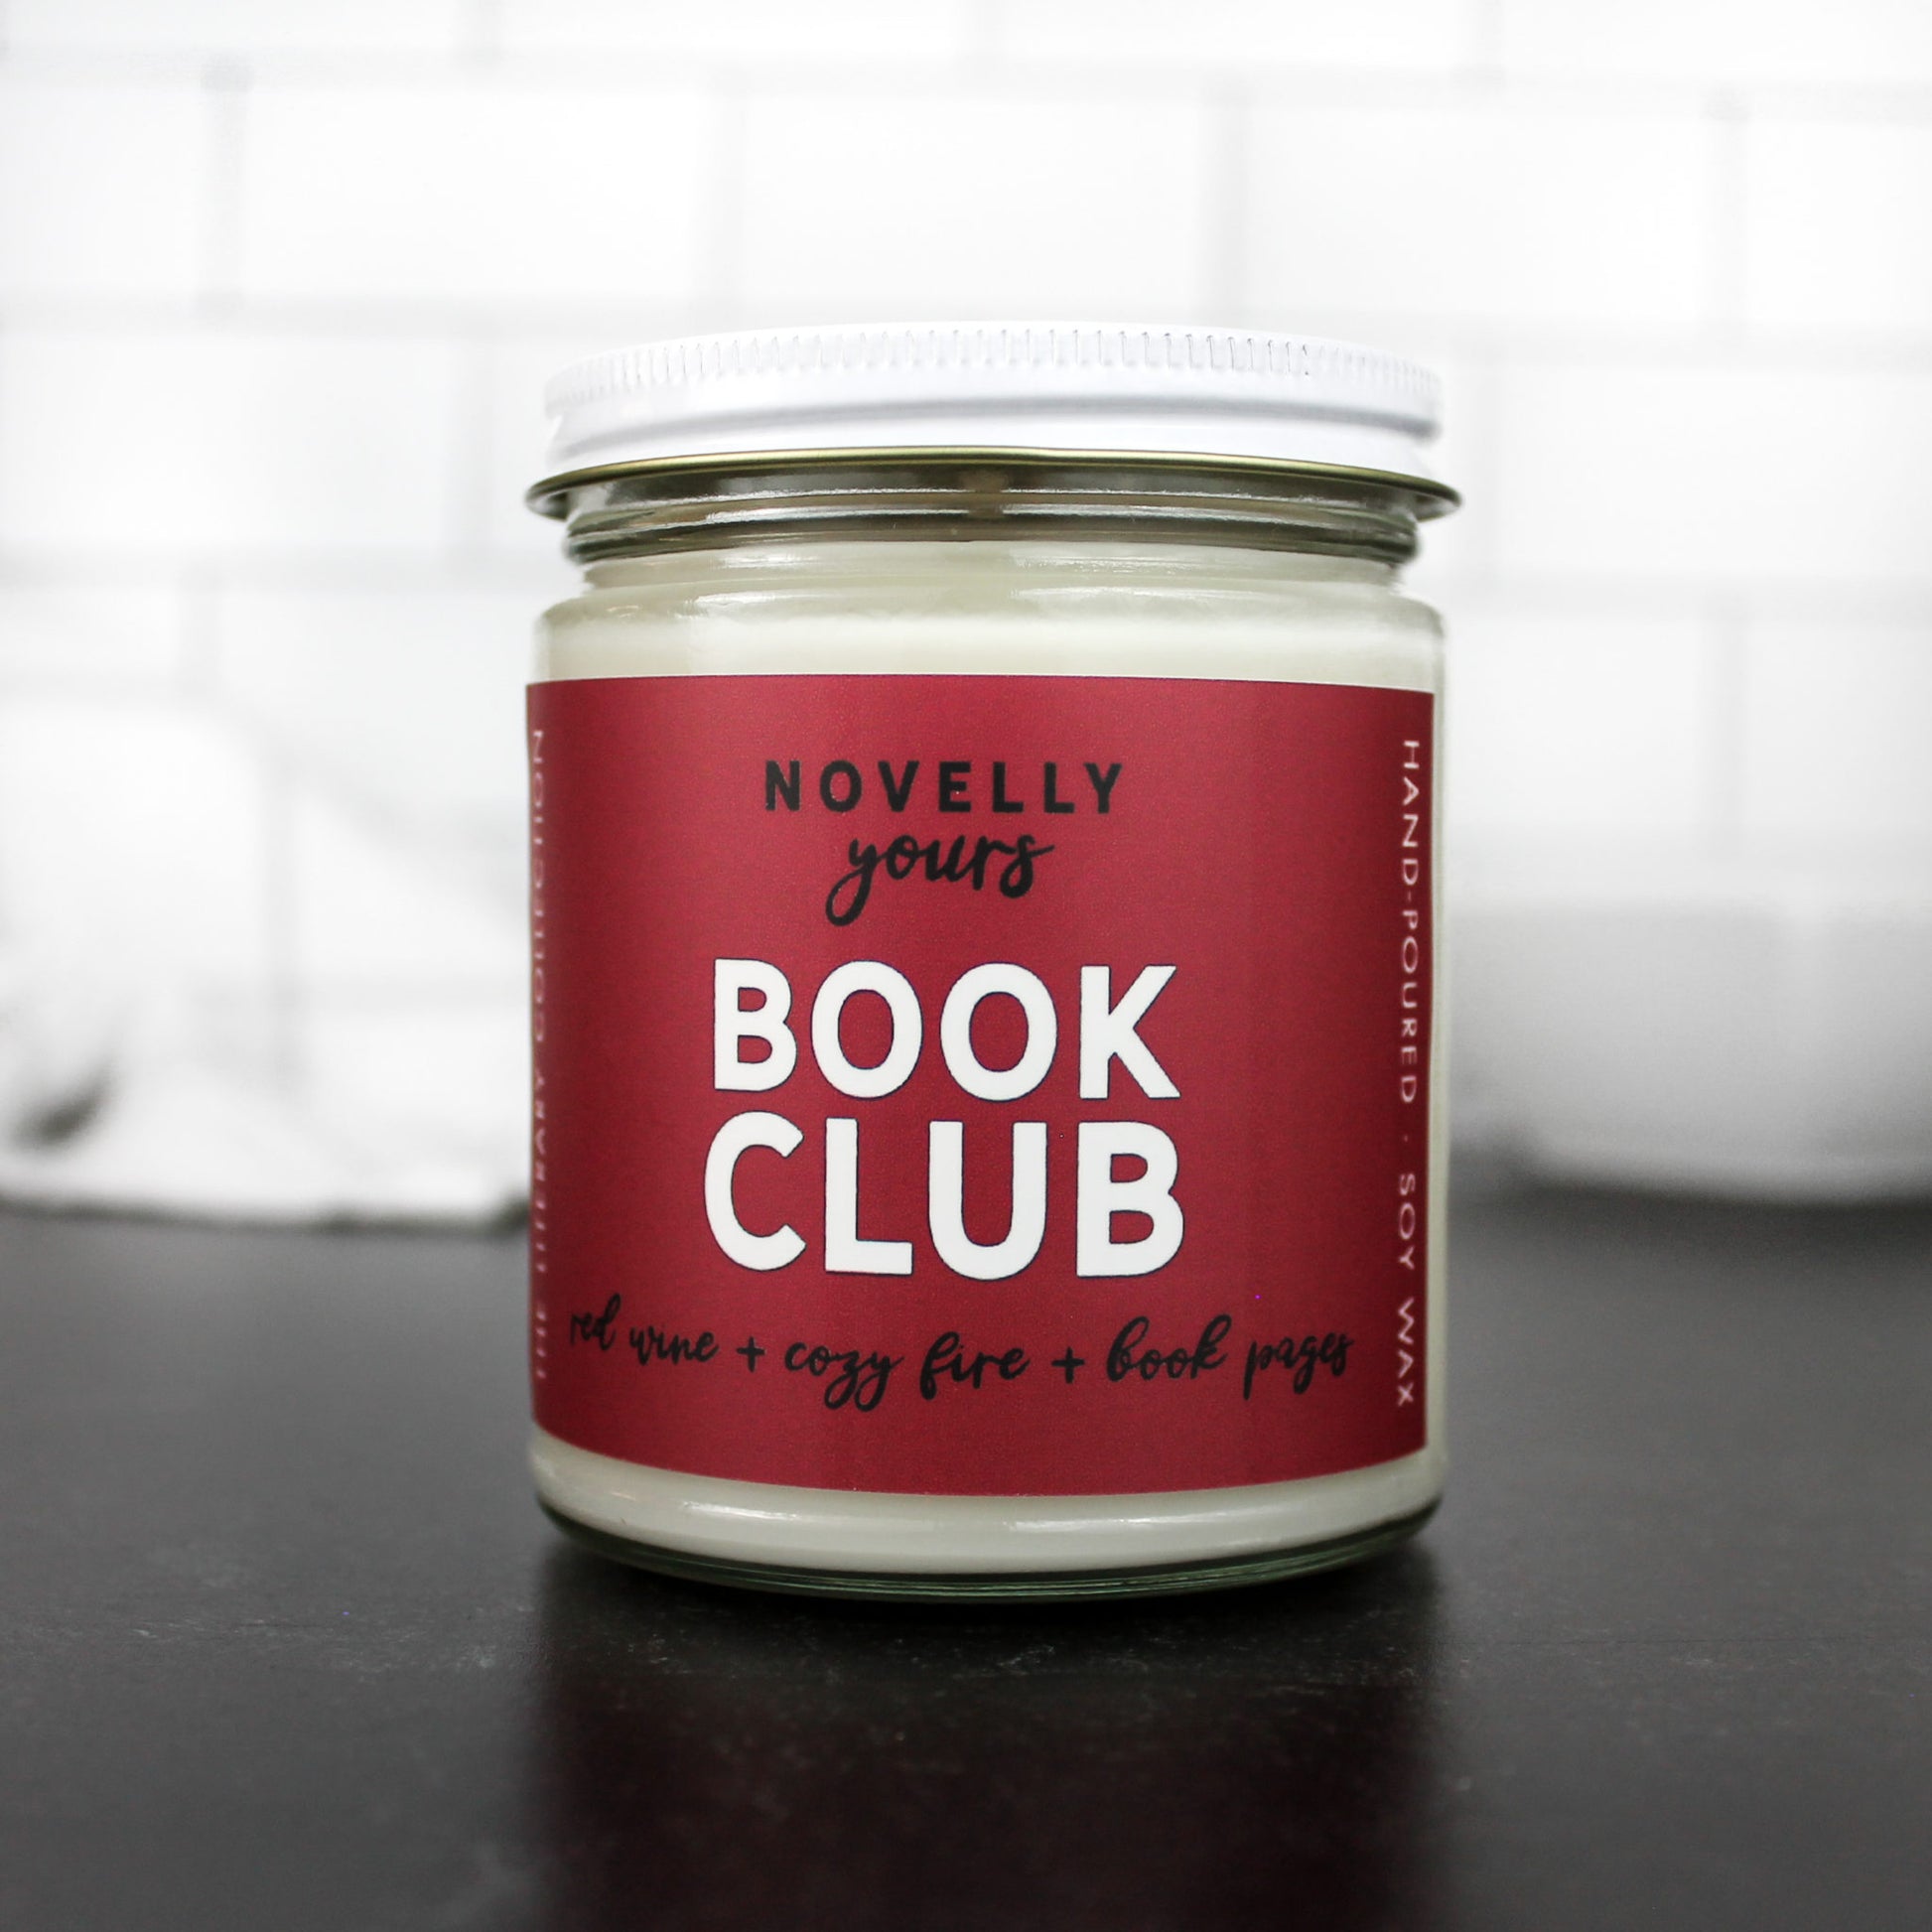 scented soy wax candle called book club on red wine label in clear jar with white lid